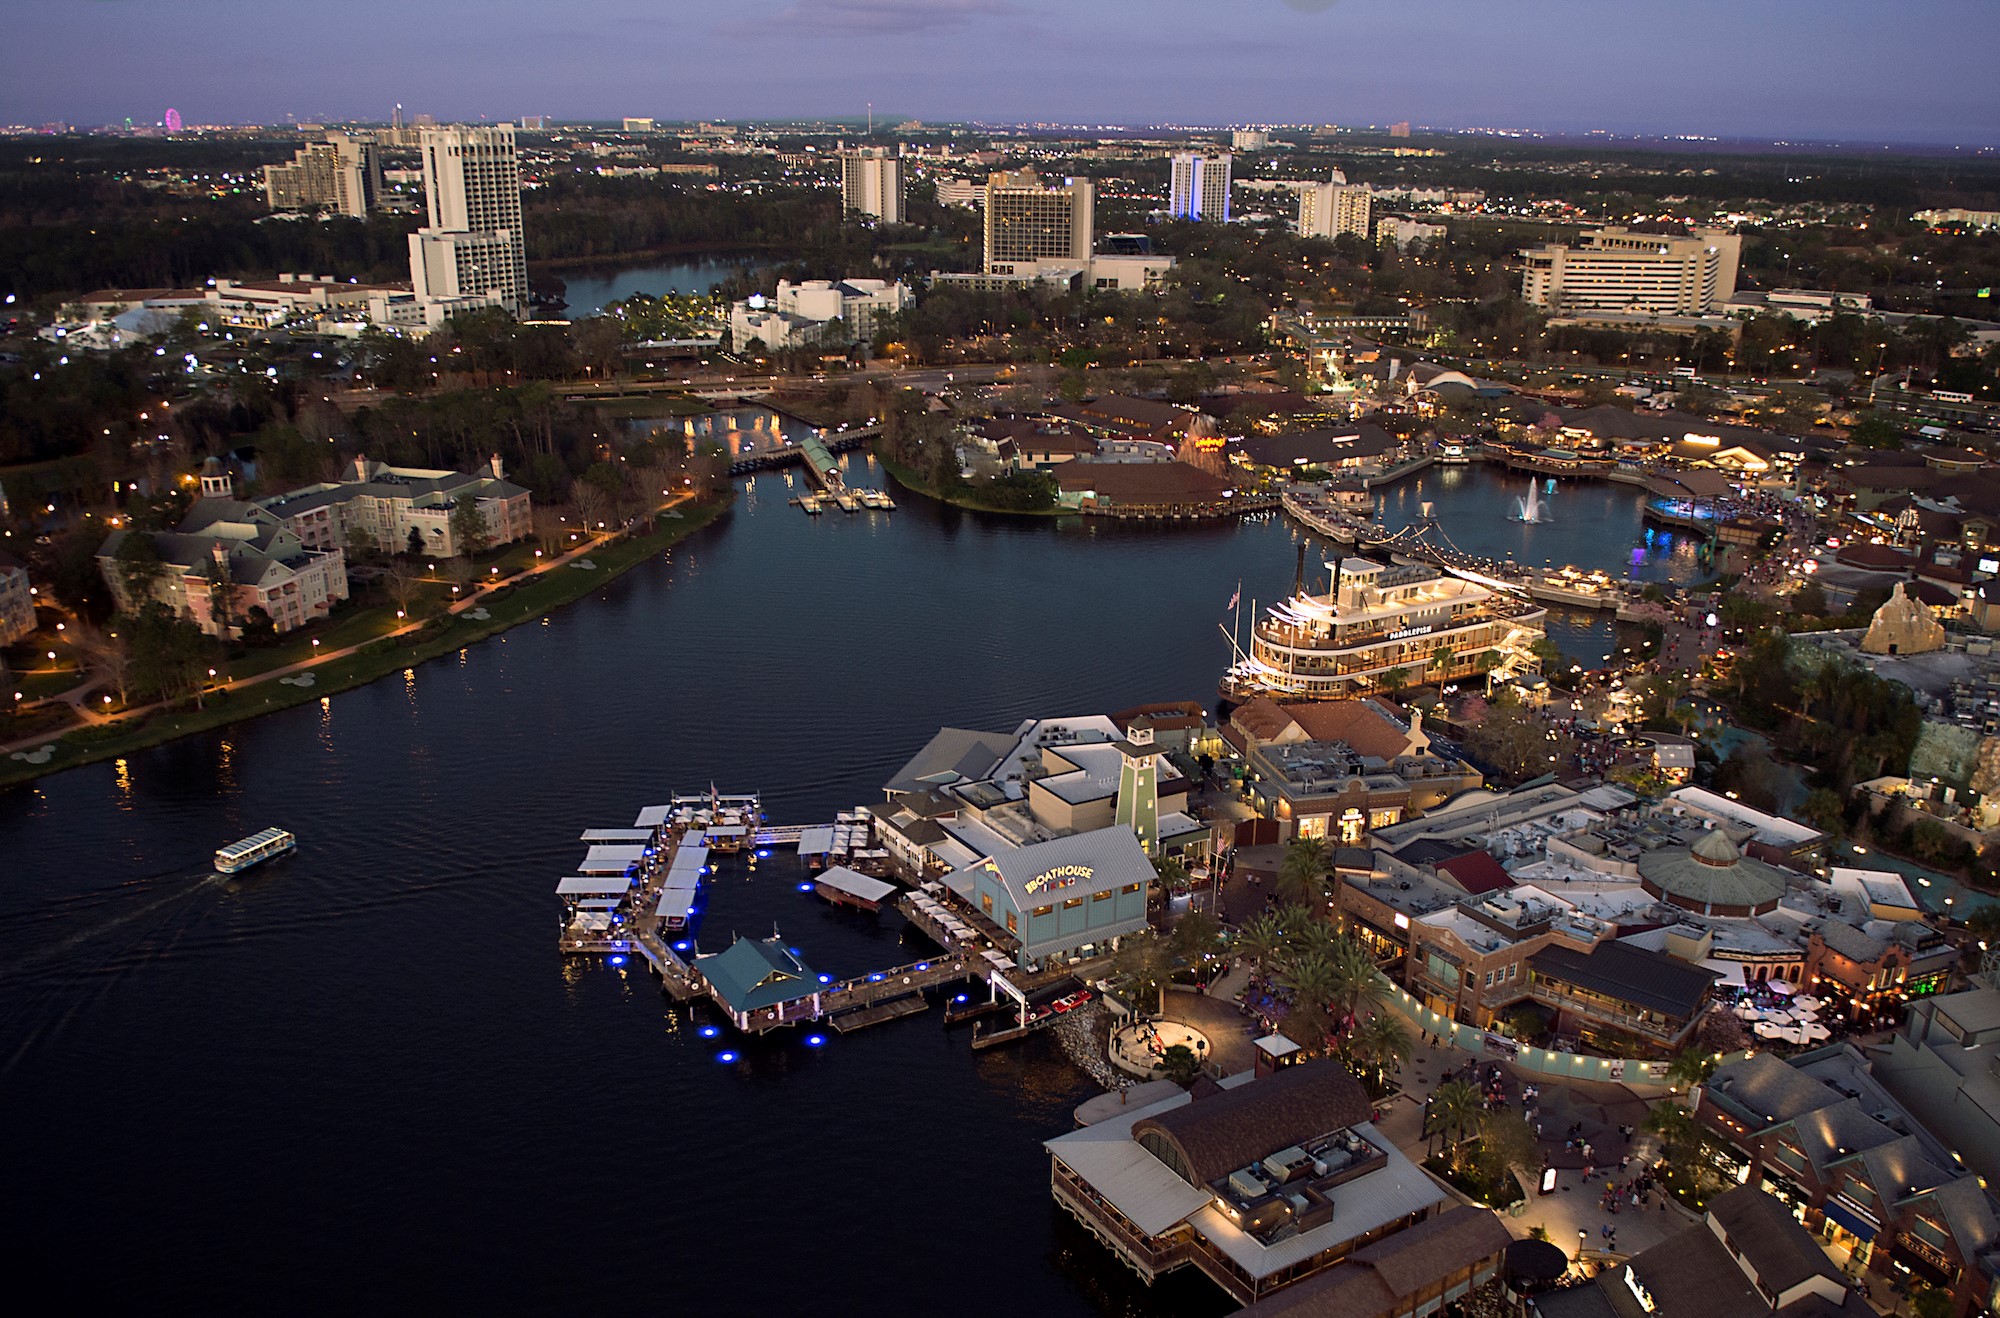 Disney Springs Resort Area Hotels to Continue Offering Select Disney Resort Hotel Benefits Throughout 2019